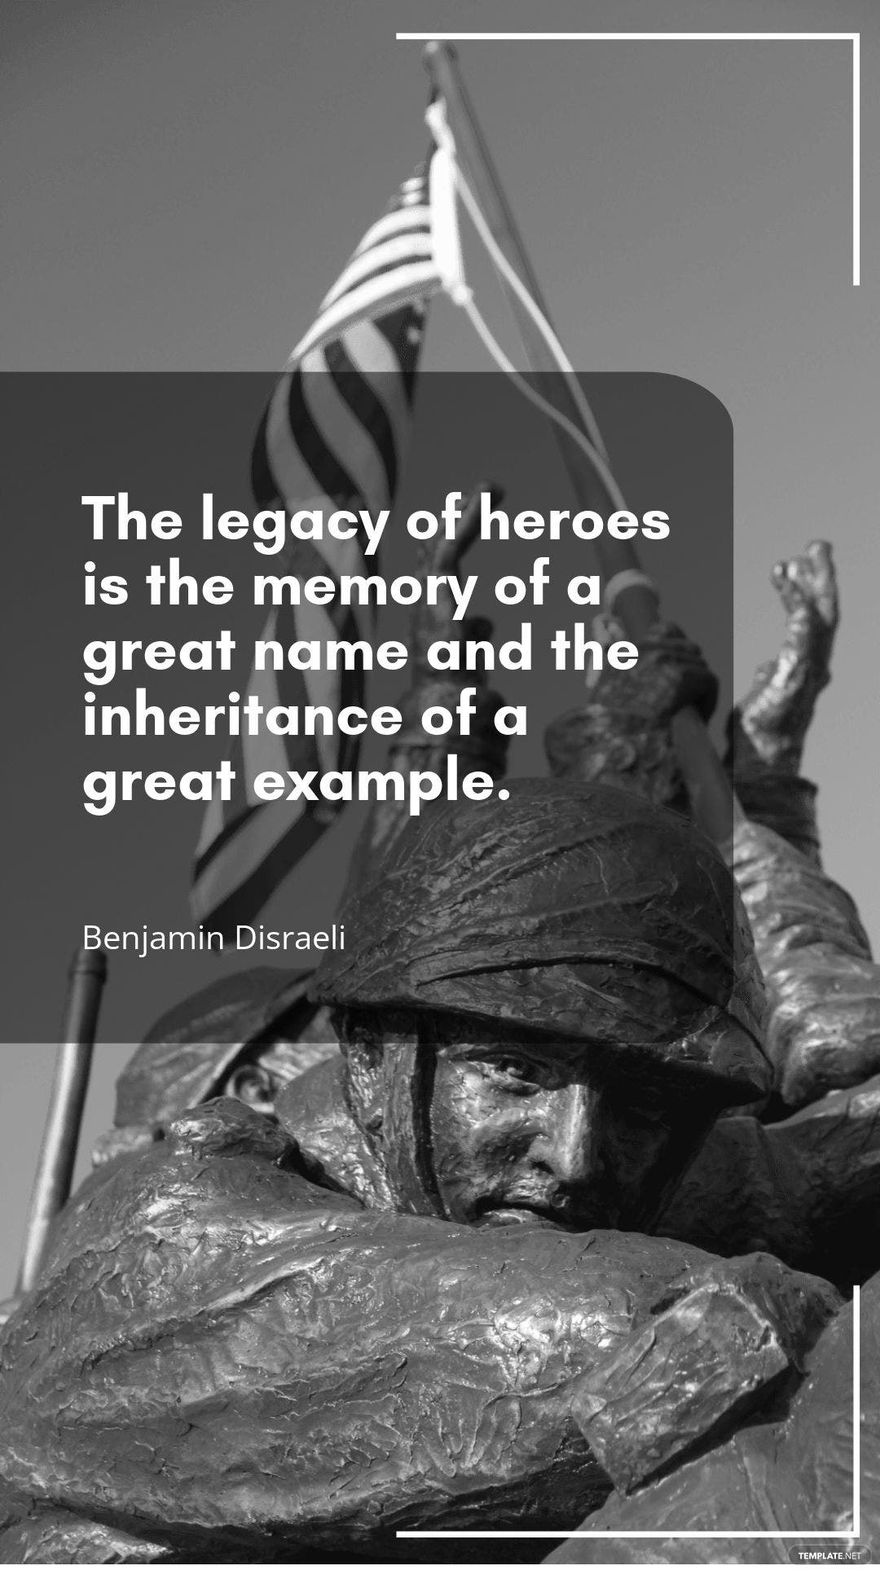 Free Benjamin Disraeli - The legacy of heroes is the memory of a great name and the inheritance of a great example.